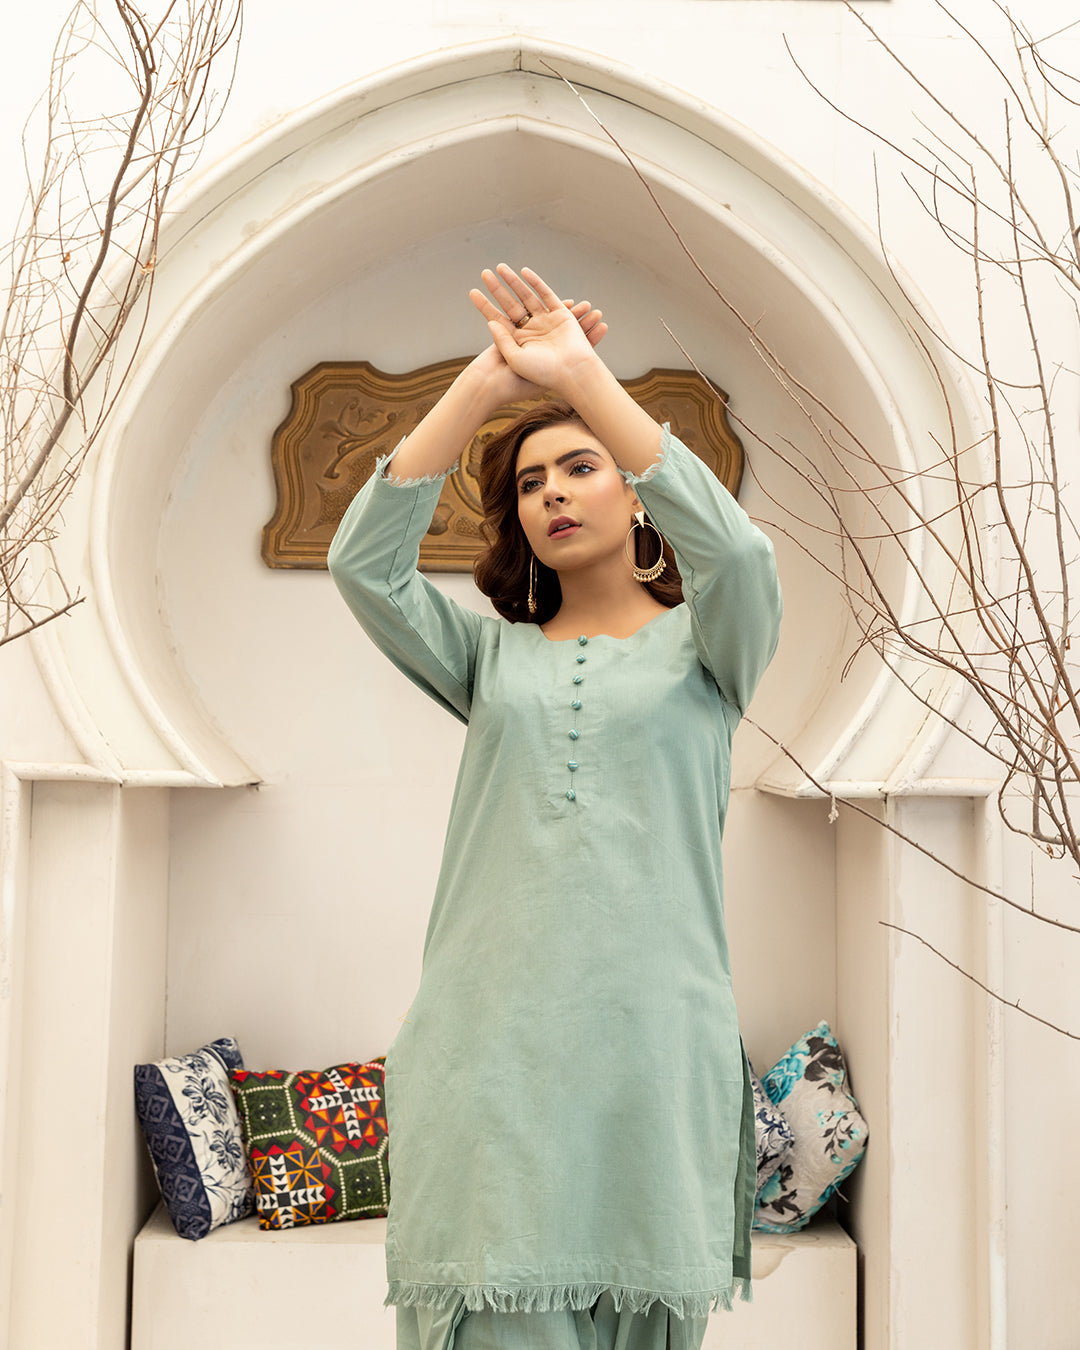 ARZOO (QY-304) - Winter Collection by Qasim Yaqoob